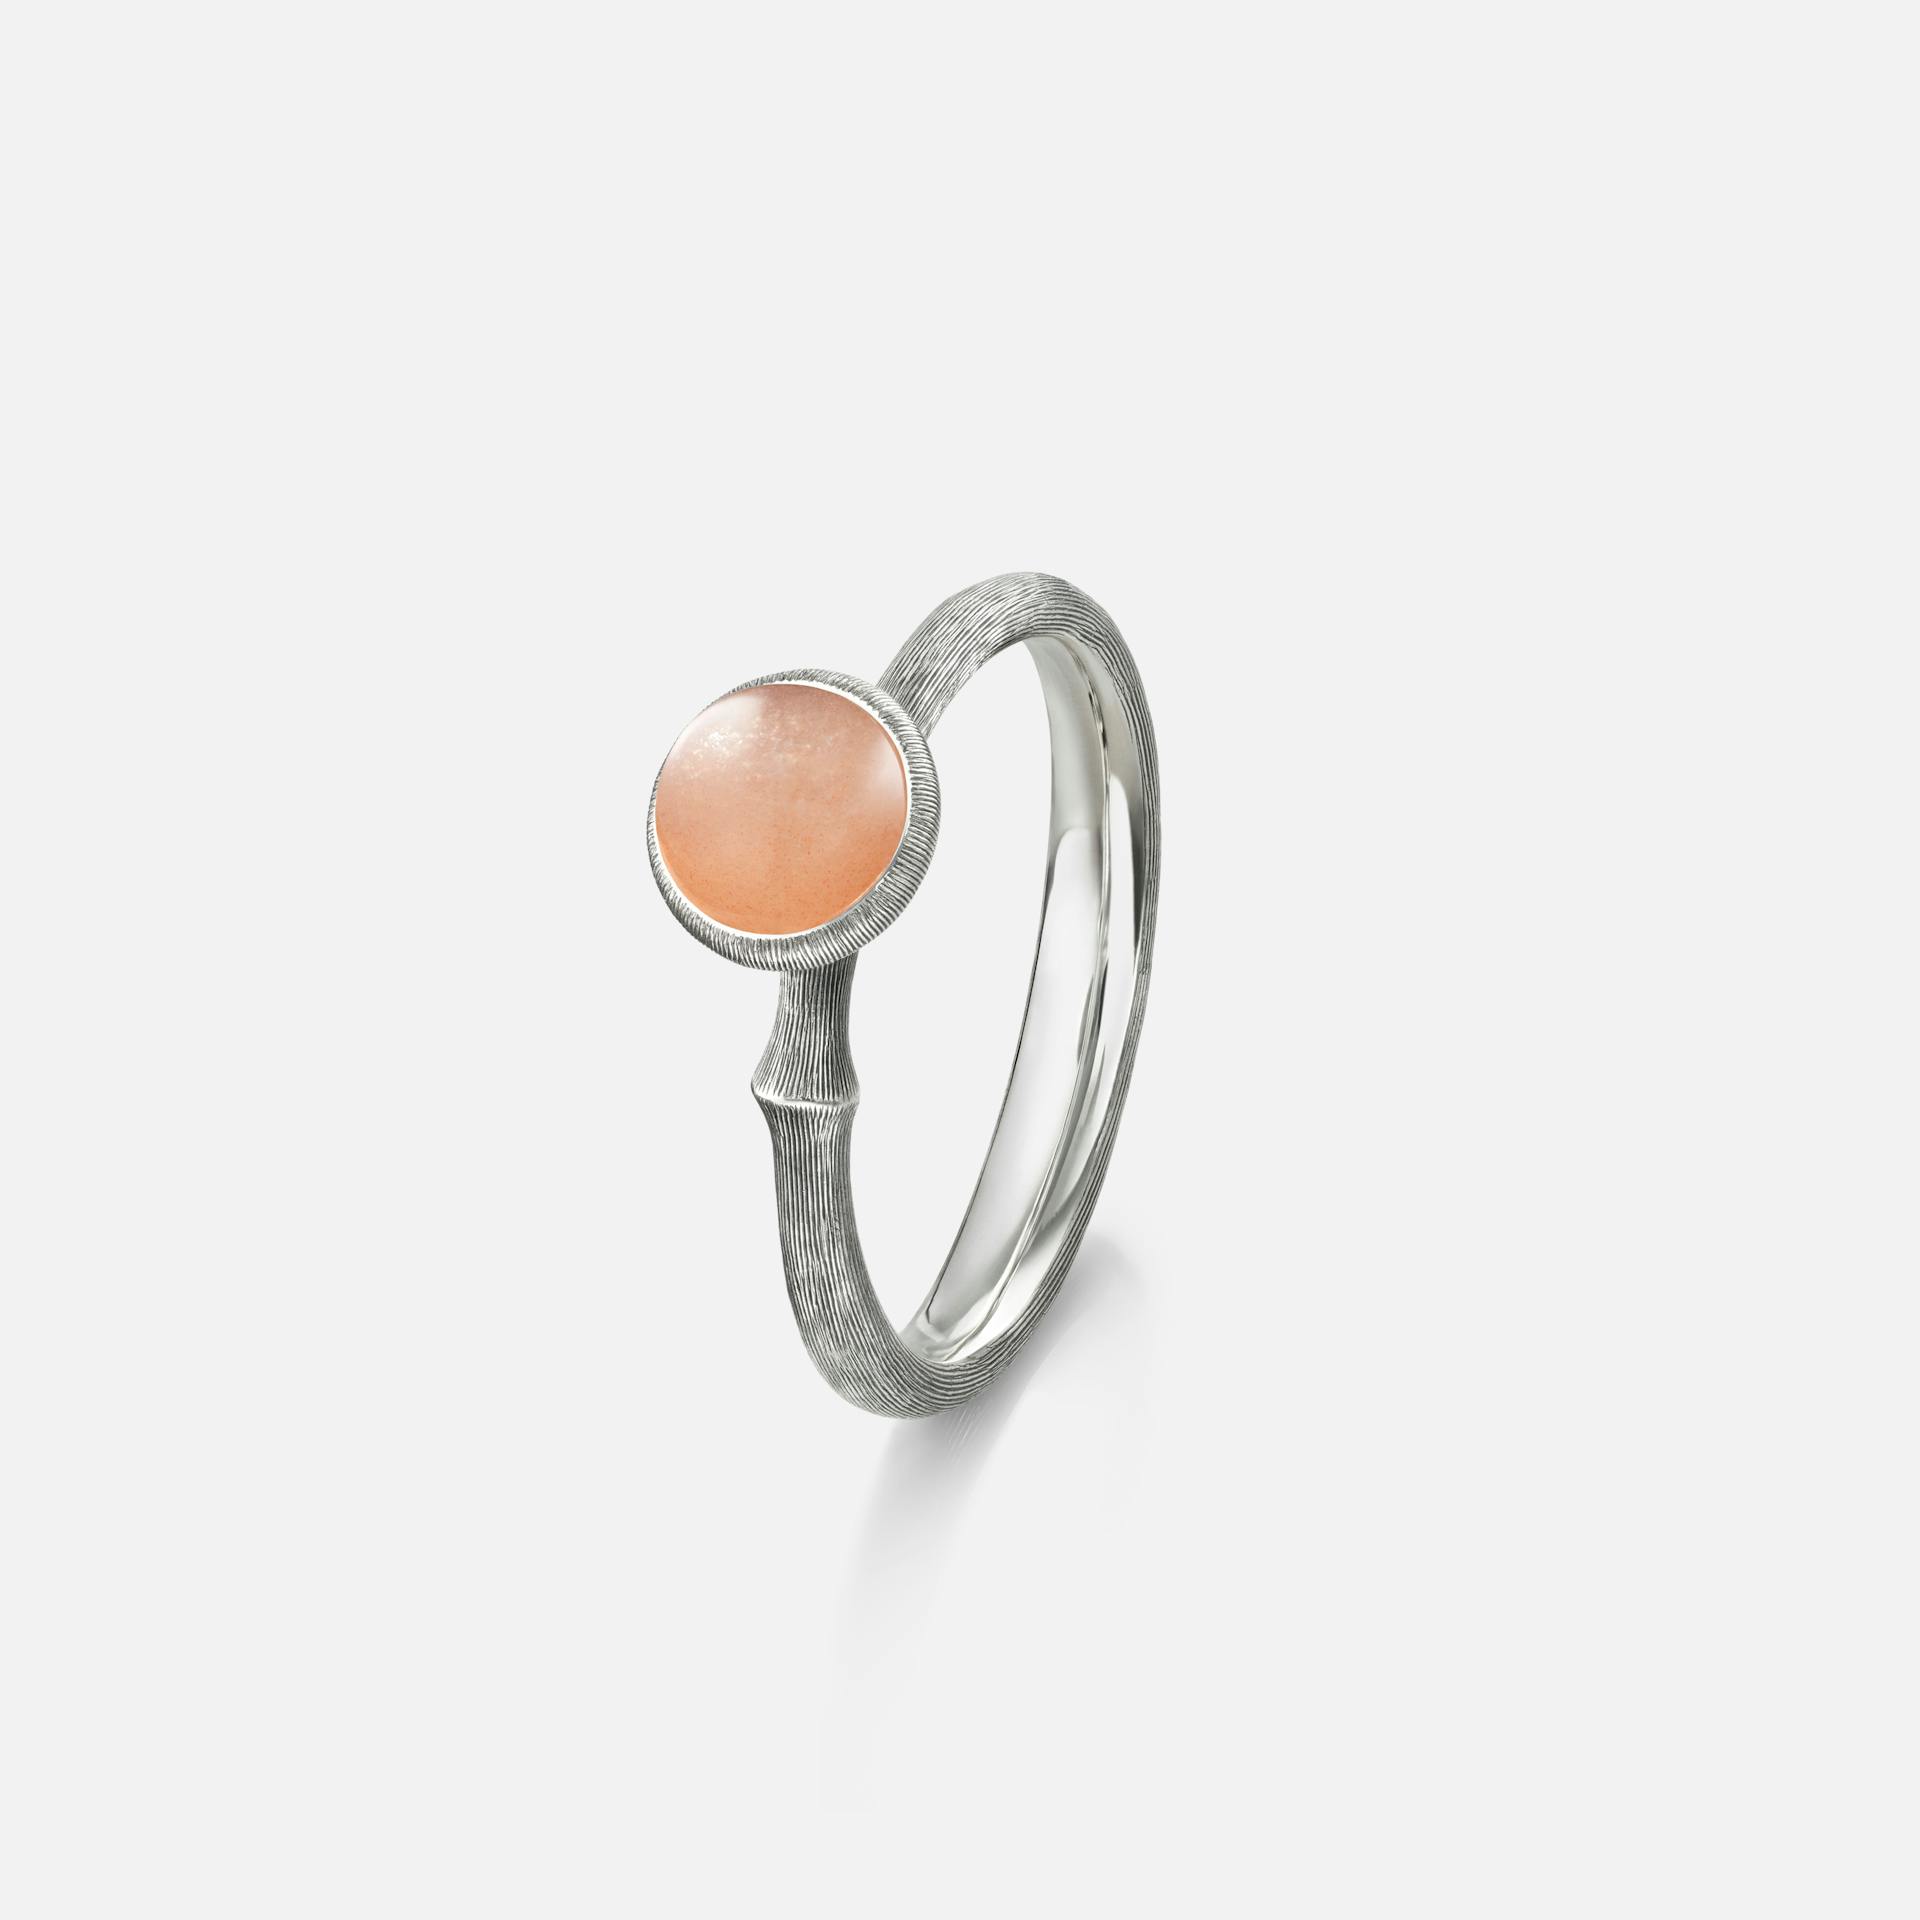 Lotus Ring size 0 in Oxidized Sterling Silver with Blush Moonstone  |  Ole Lynggaard Copenhagen